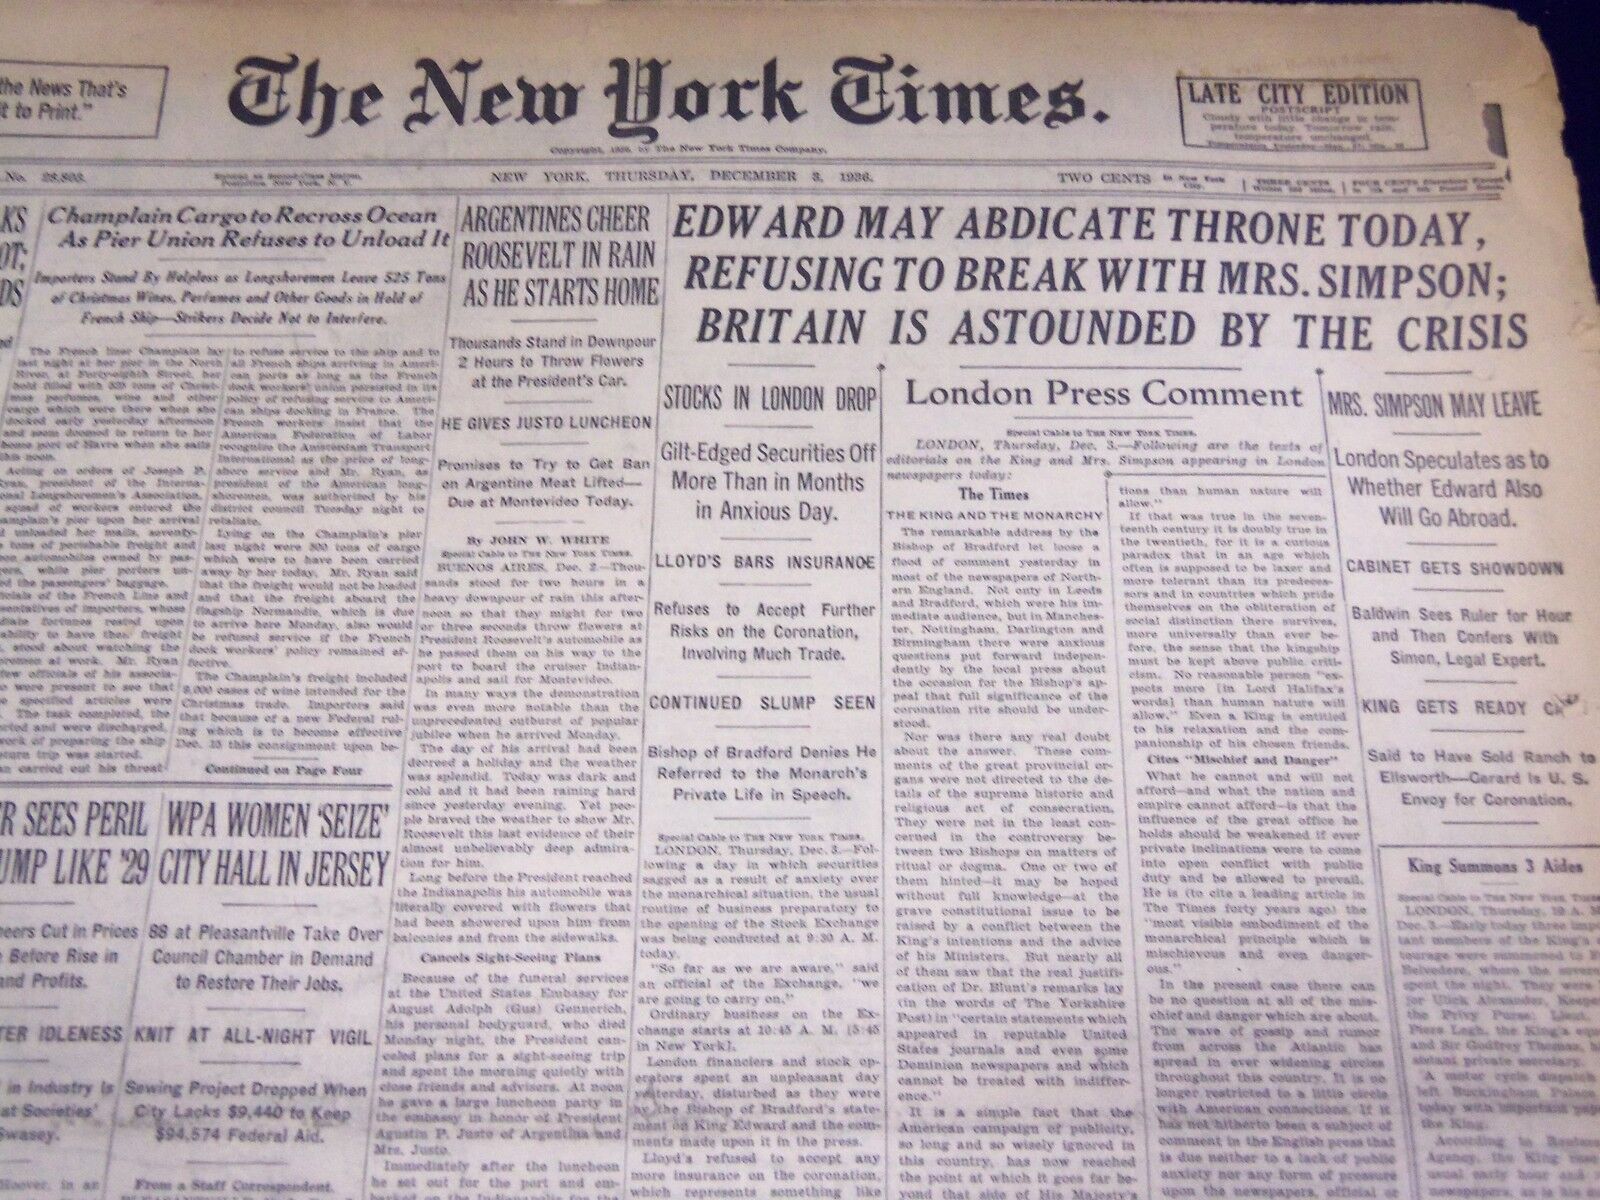 1936 DEC 3 NEW YORK TIMES - EDWARD MAY ABDICATE THRONE TODAY - NT 2123